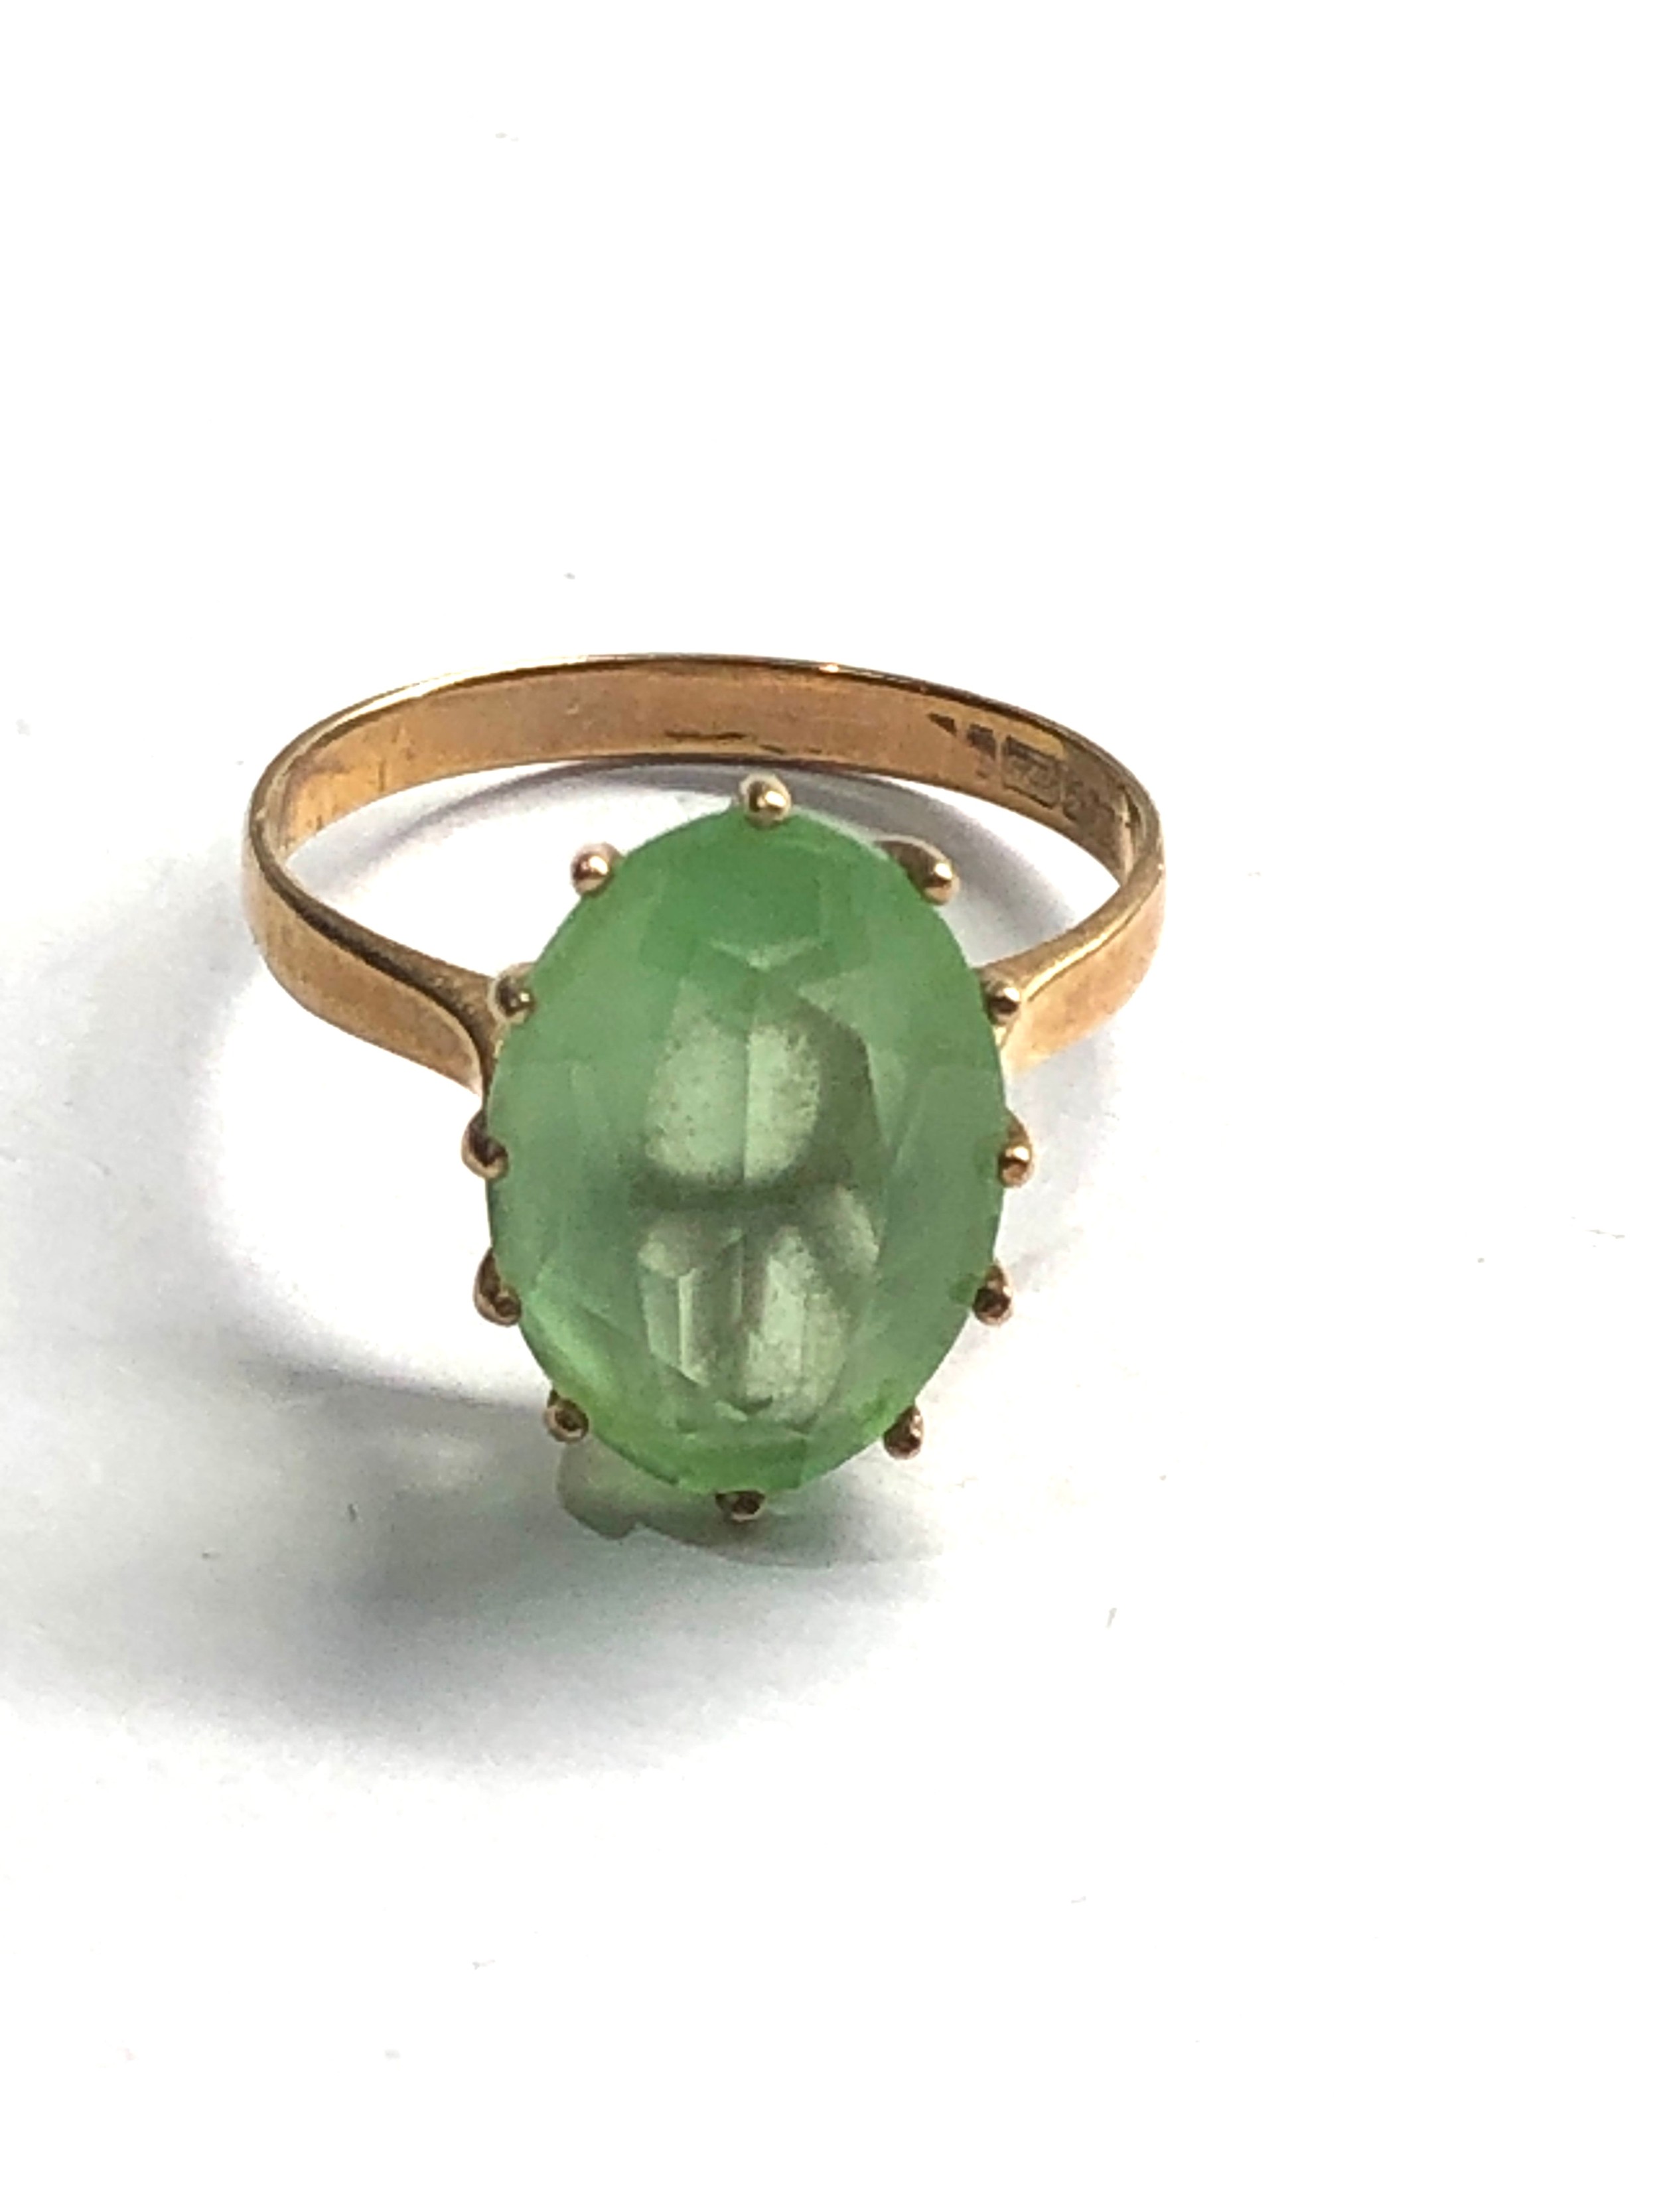 9ct gold vintage green paste stone cocktail ring (2.8g)